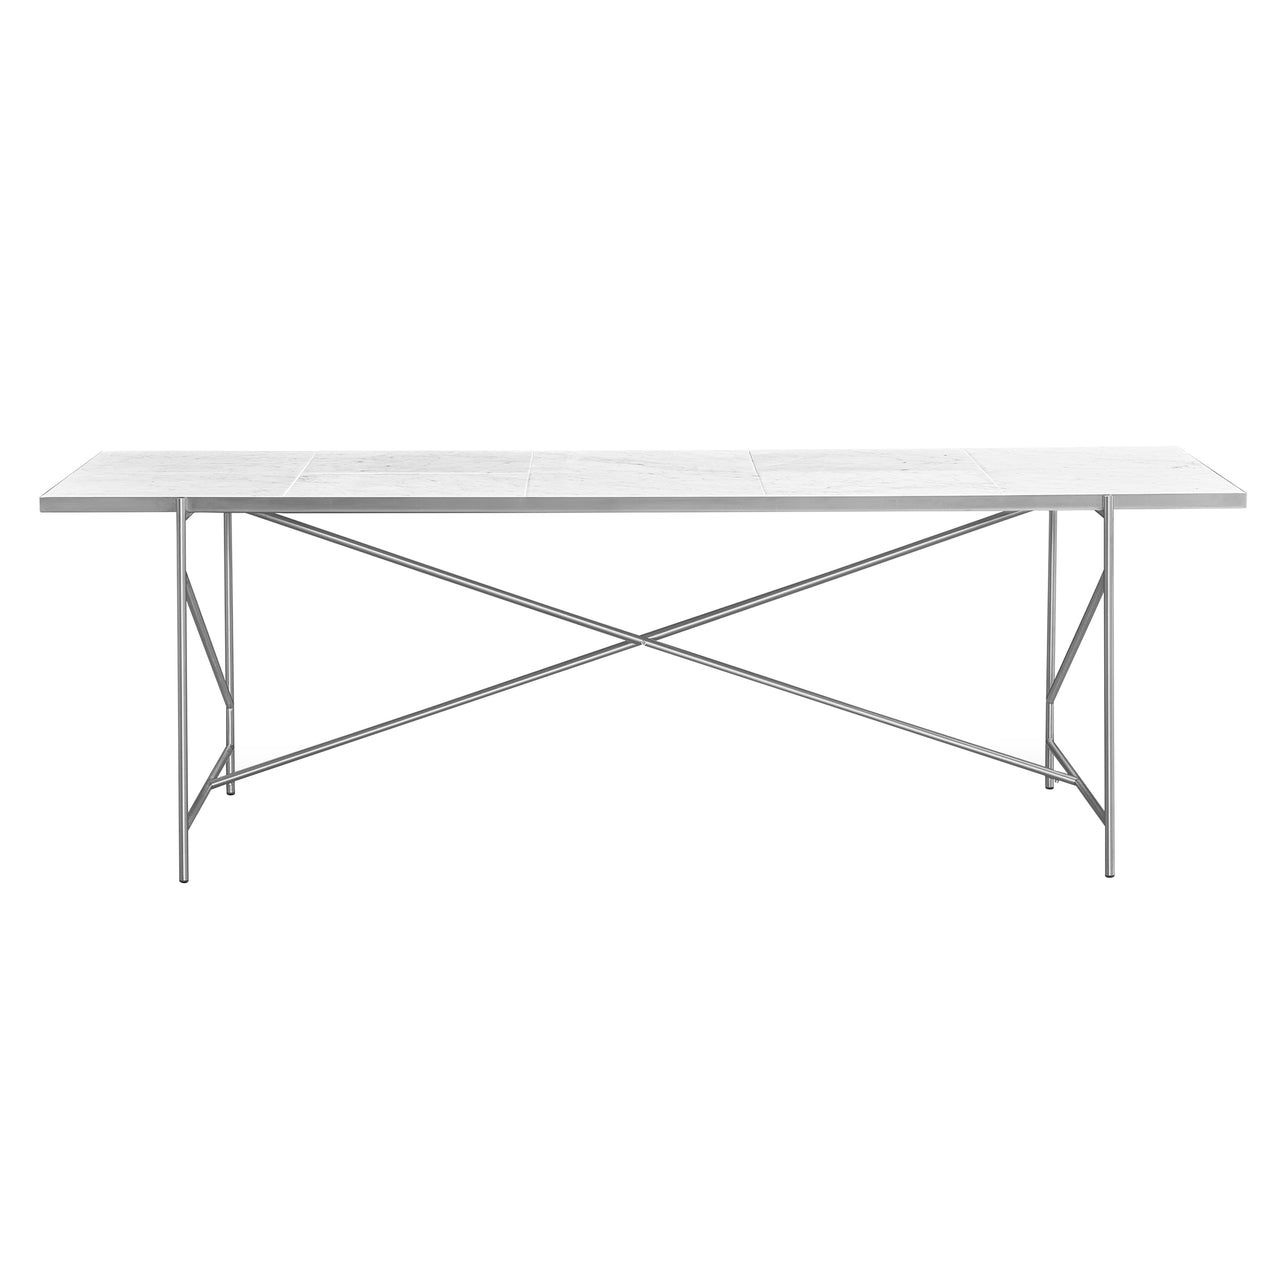 Dining Table 230: Stainless Steel + White Marble